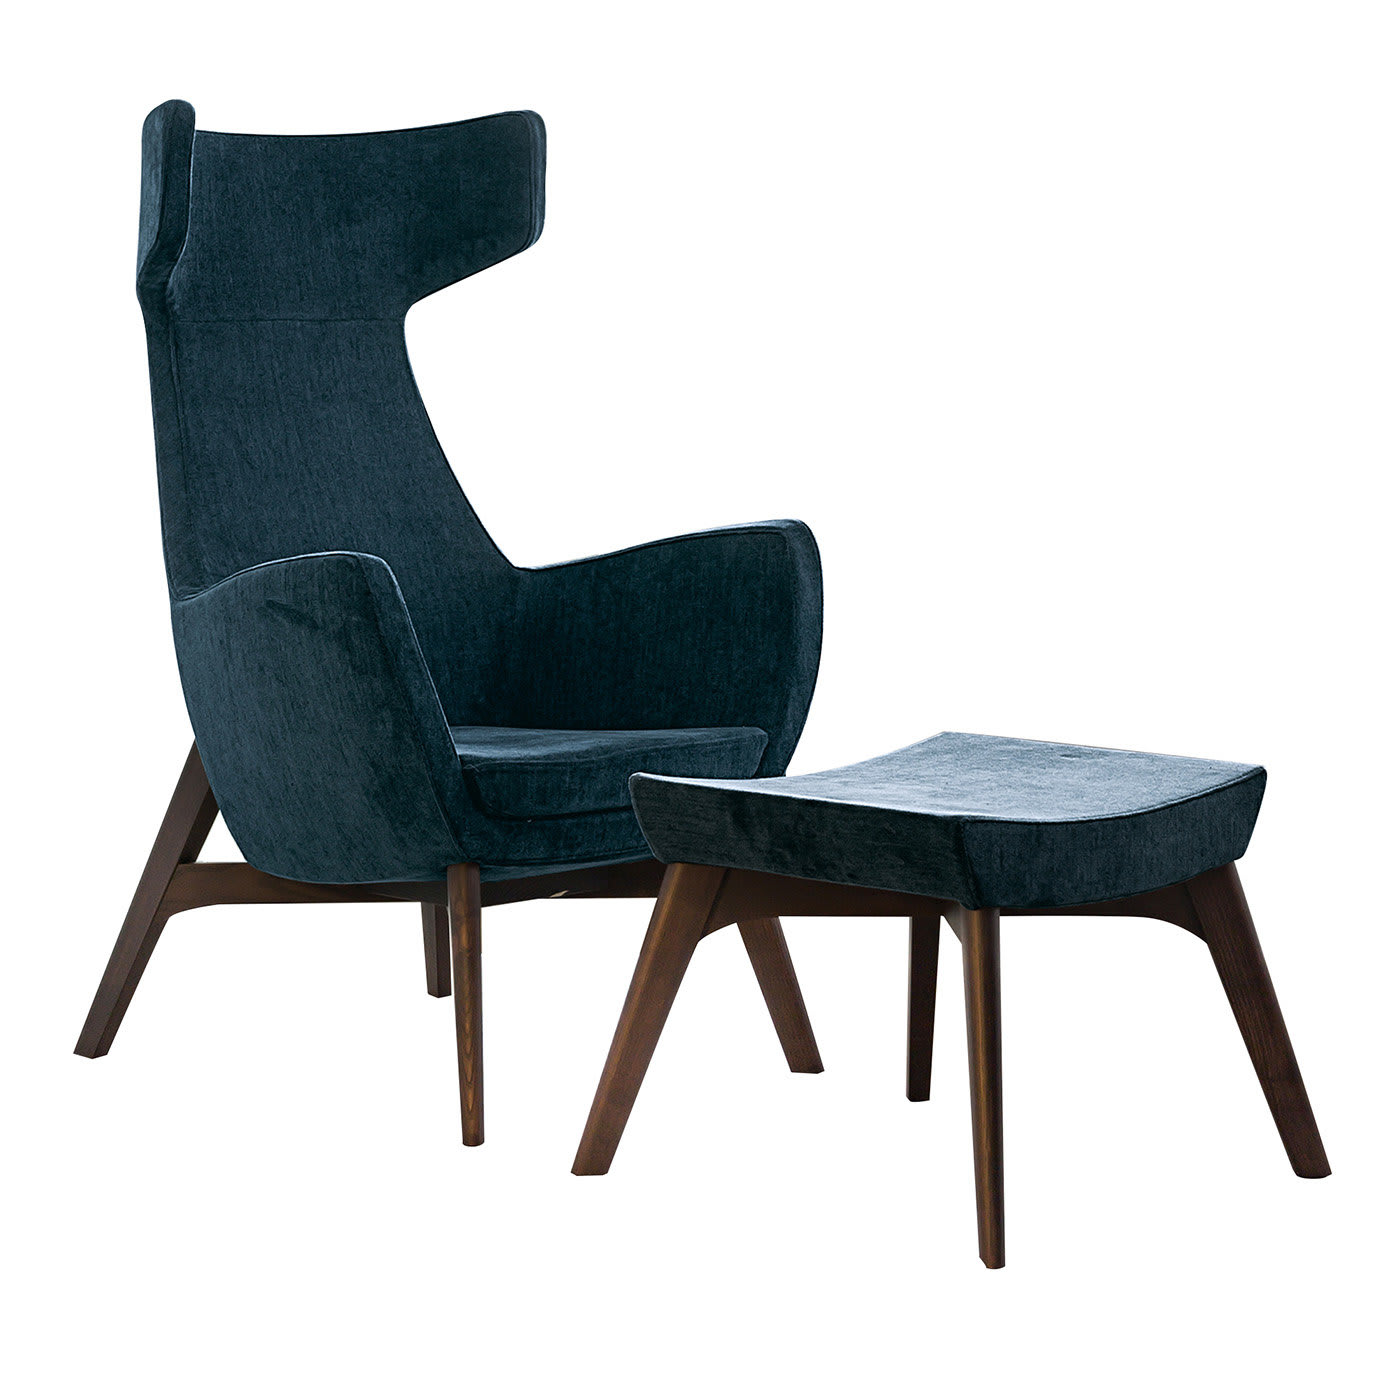 Vamp Blue Armchair with Footstool - Dall'Agnese